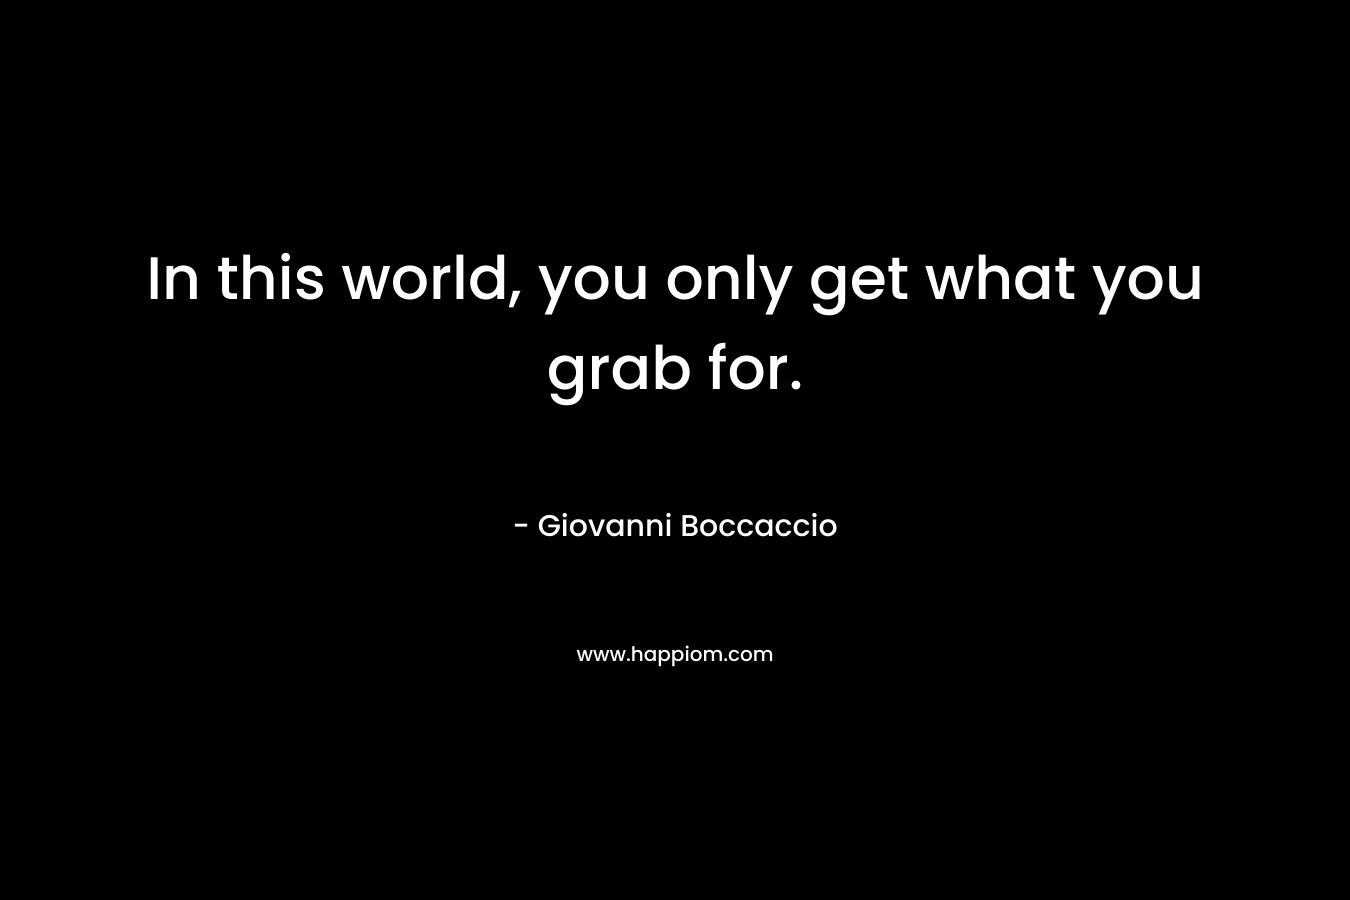 In this world, you only get what you grab for. – Giovanni Boccaccio